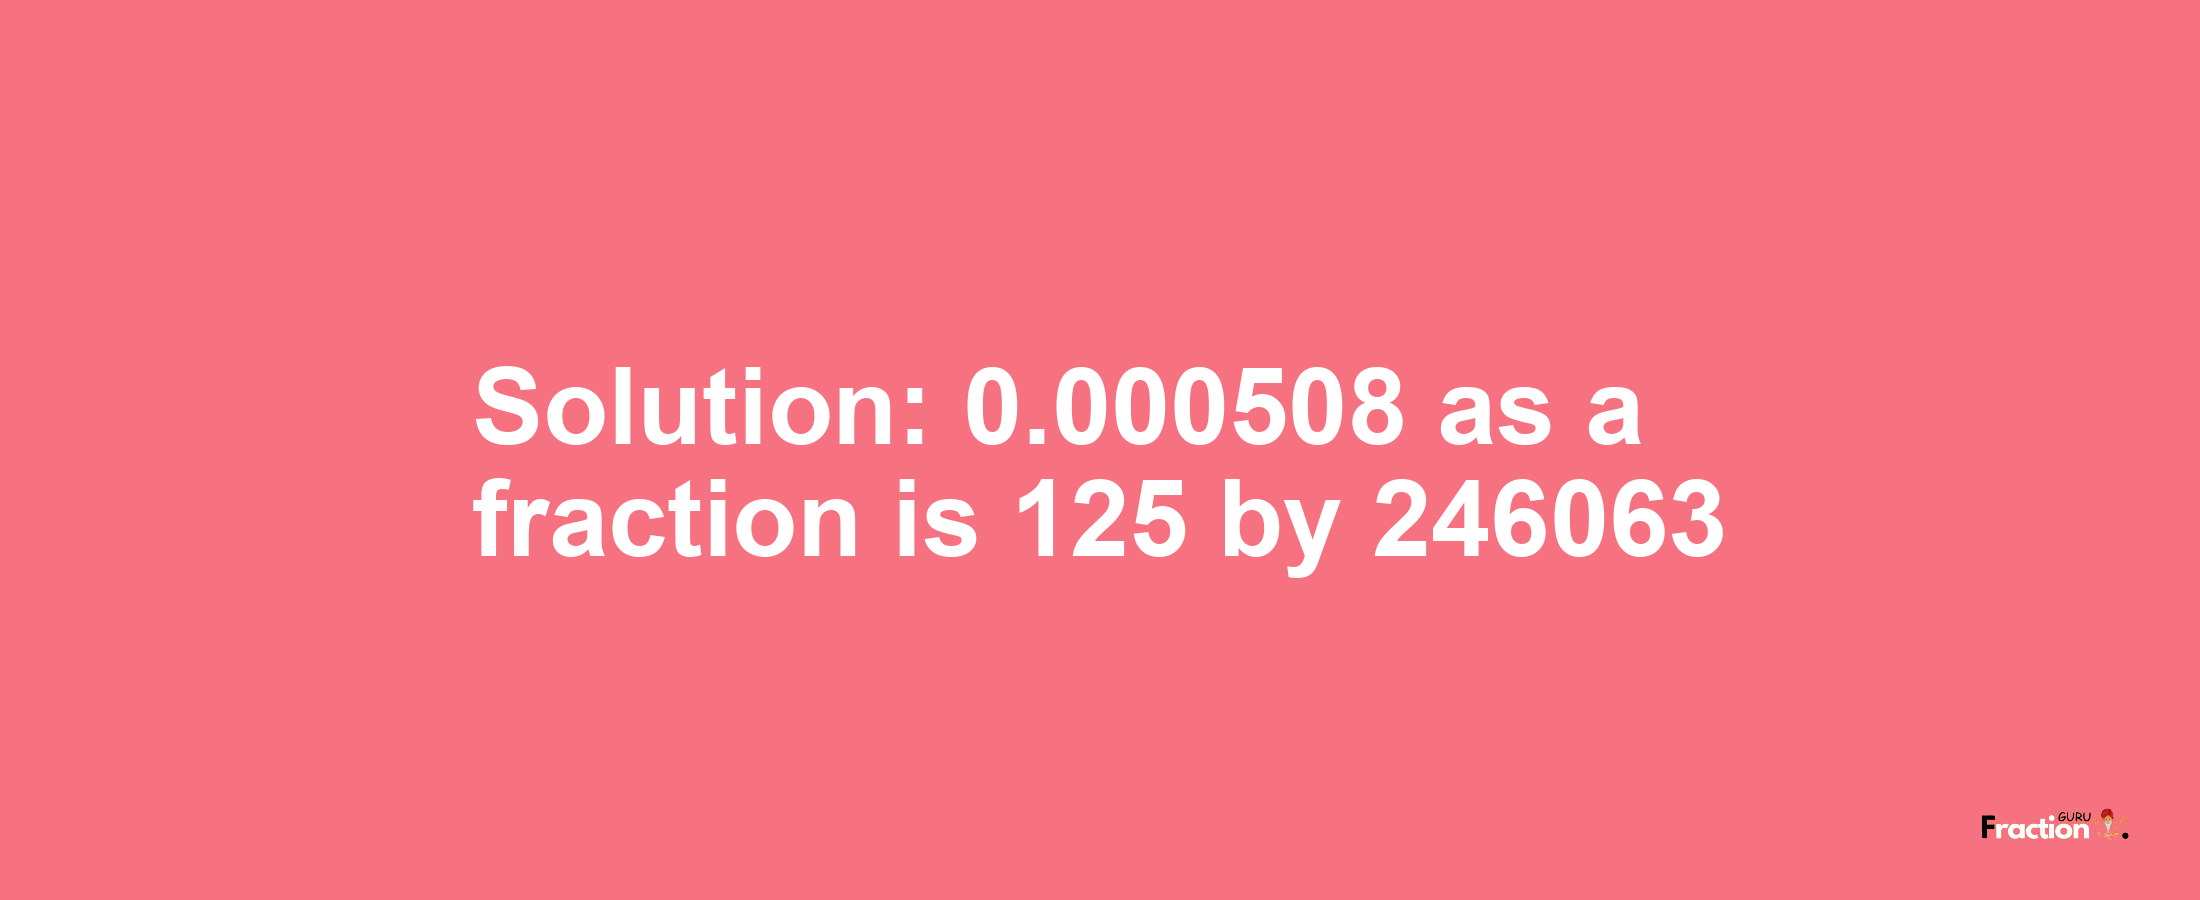 Solution:0.000508 as a fraction is 125/246063